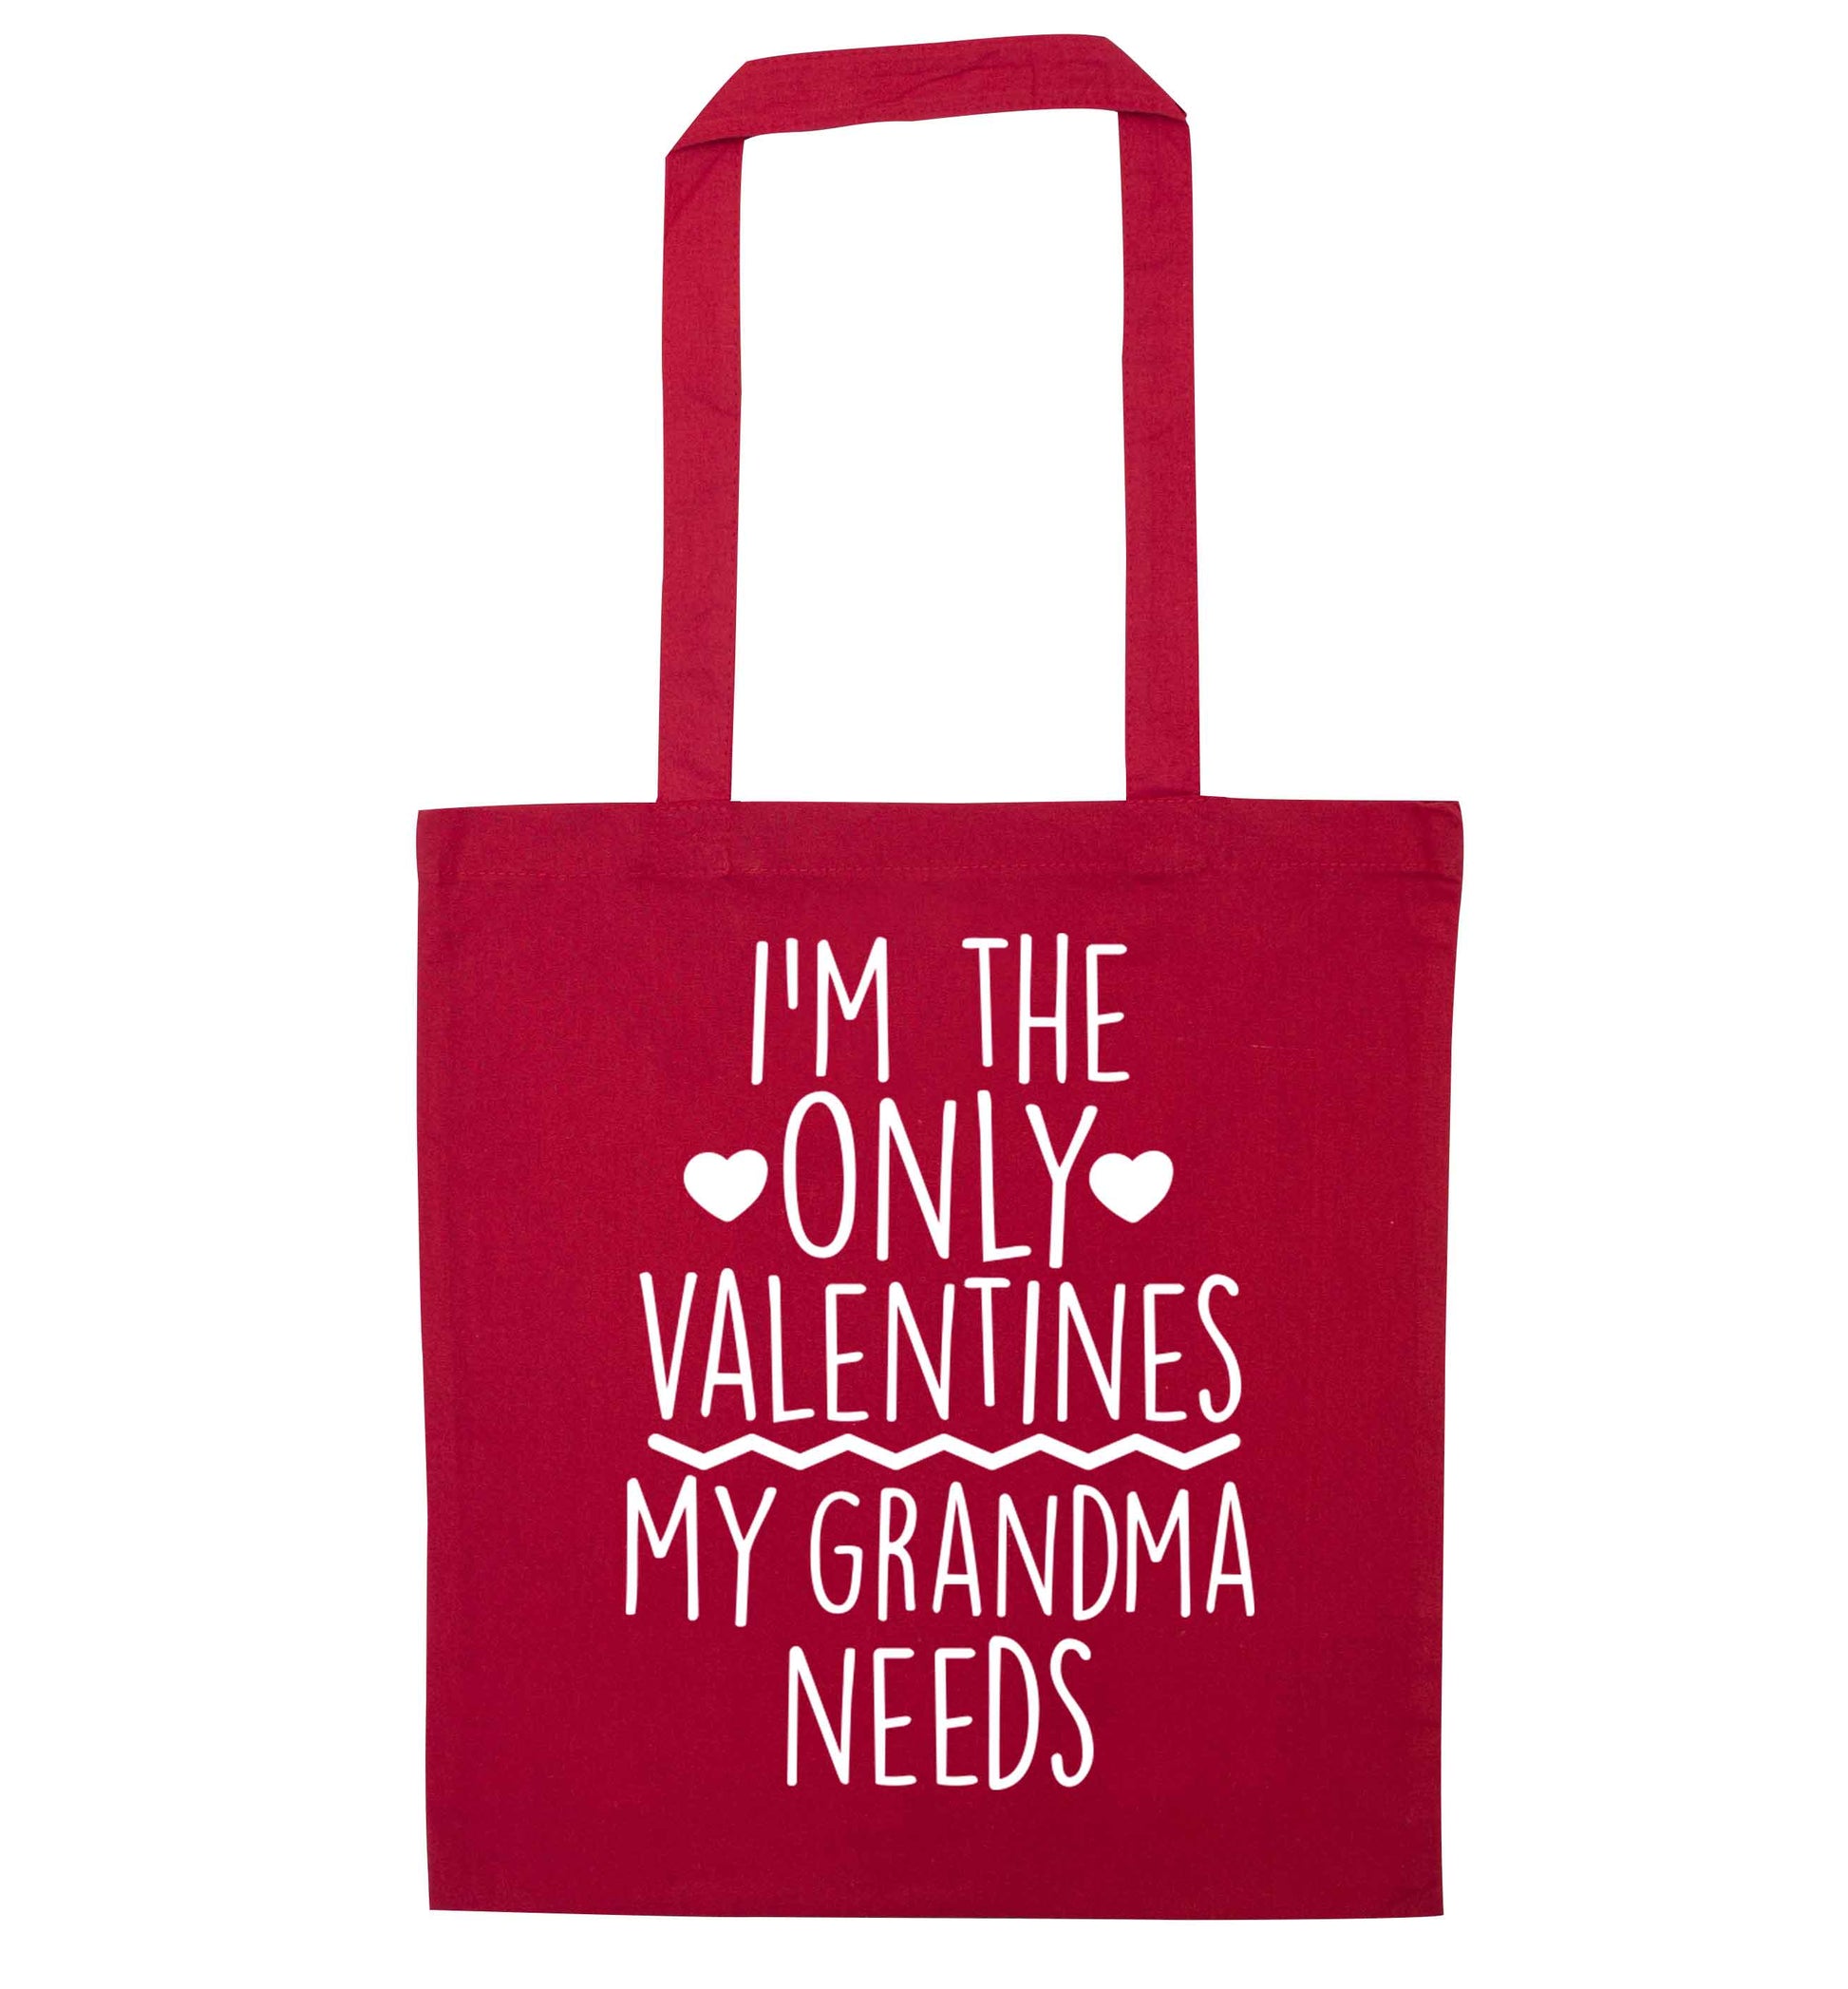 I'm the only valentines my grandma needs red tote bag